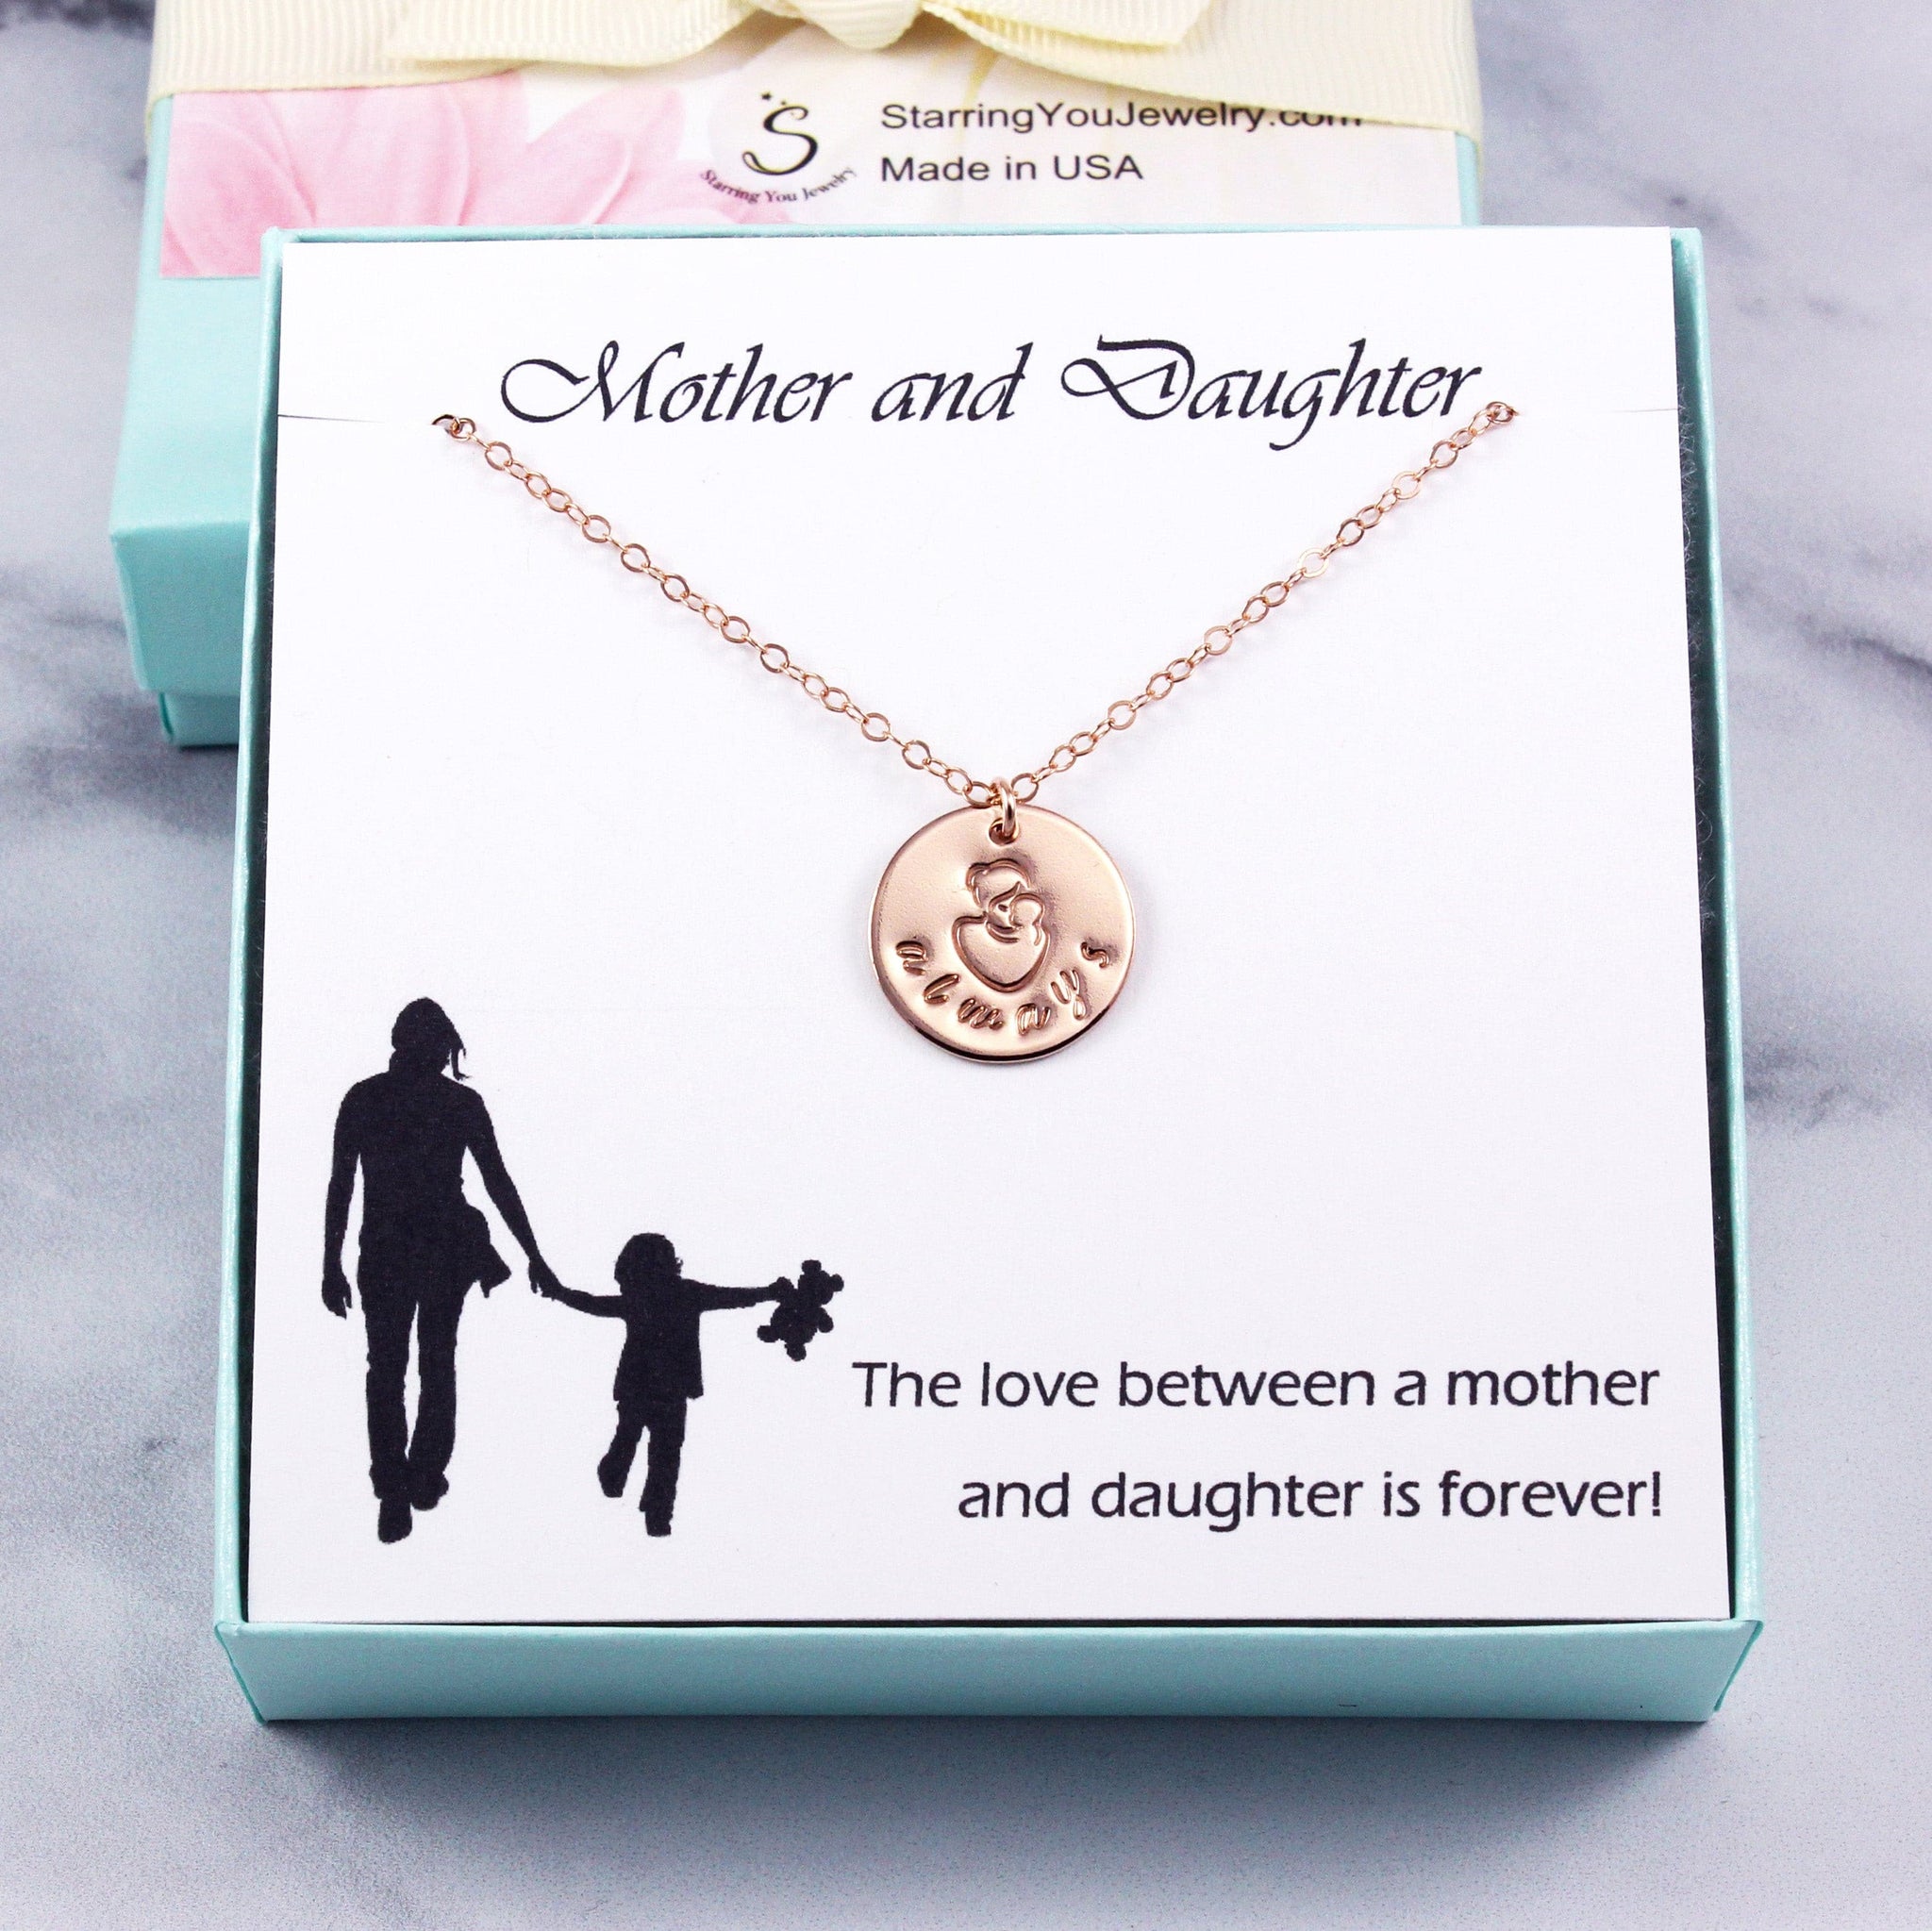 Child Necklace, Little Girl Necklace, 14k Gold Filled Personalized